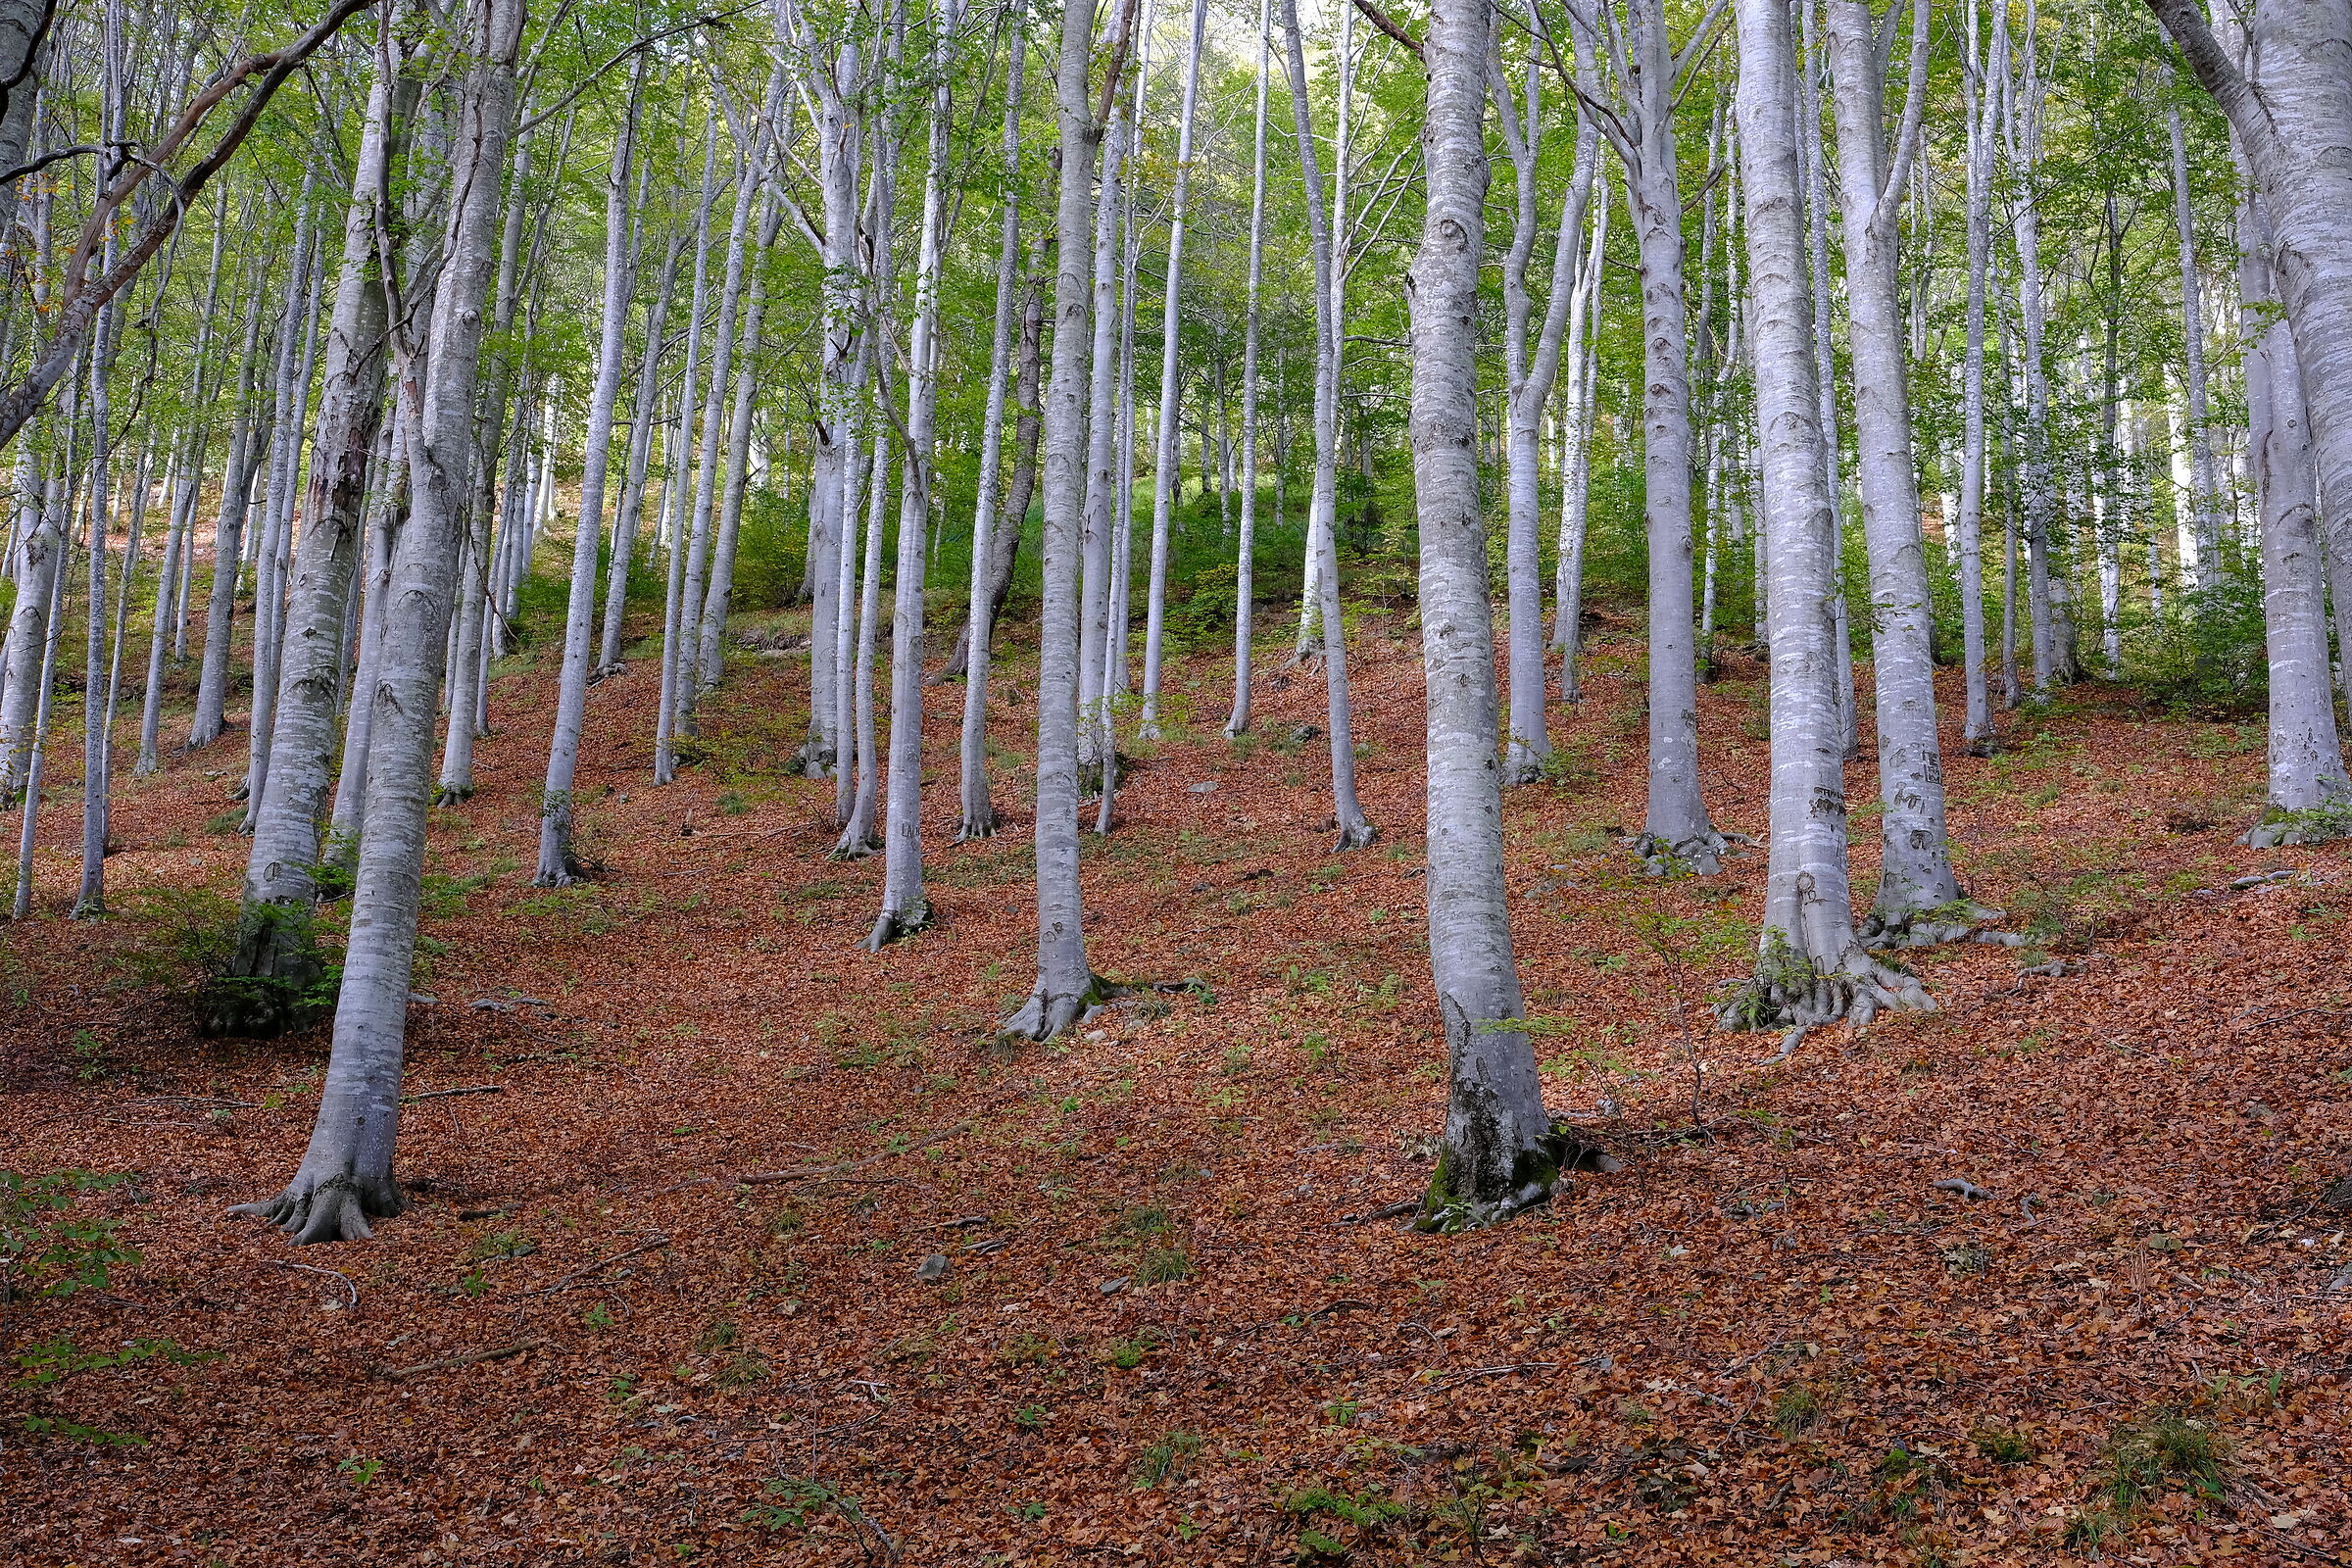 The beech forest of Penna...